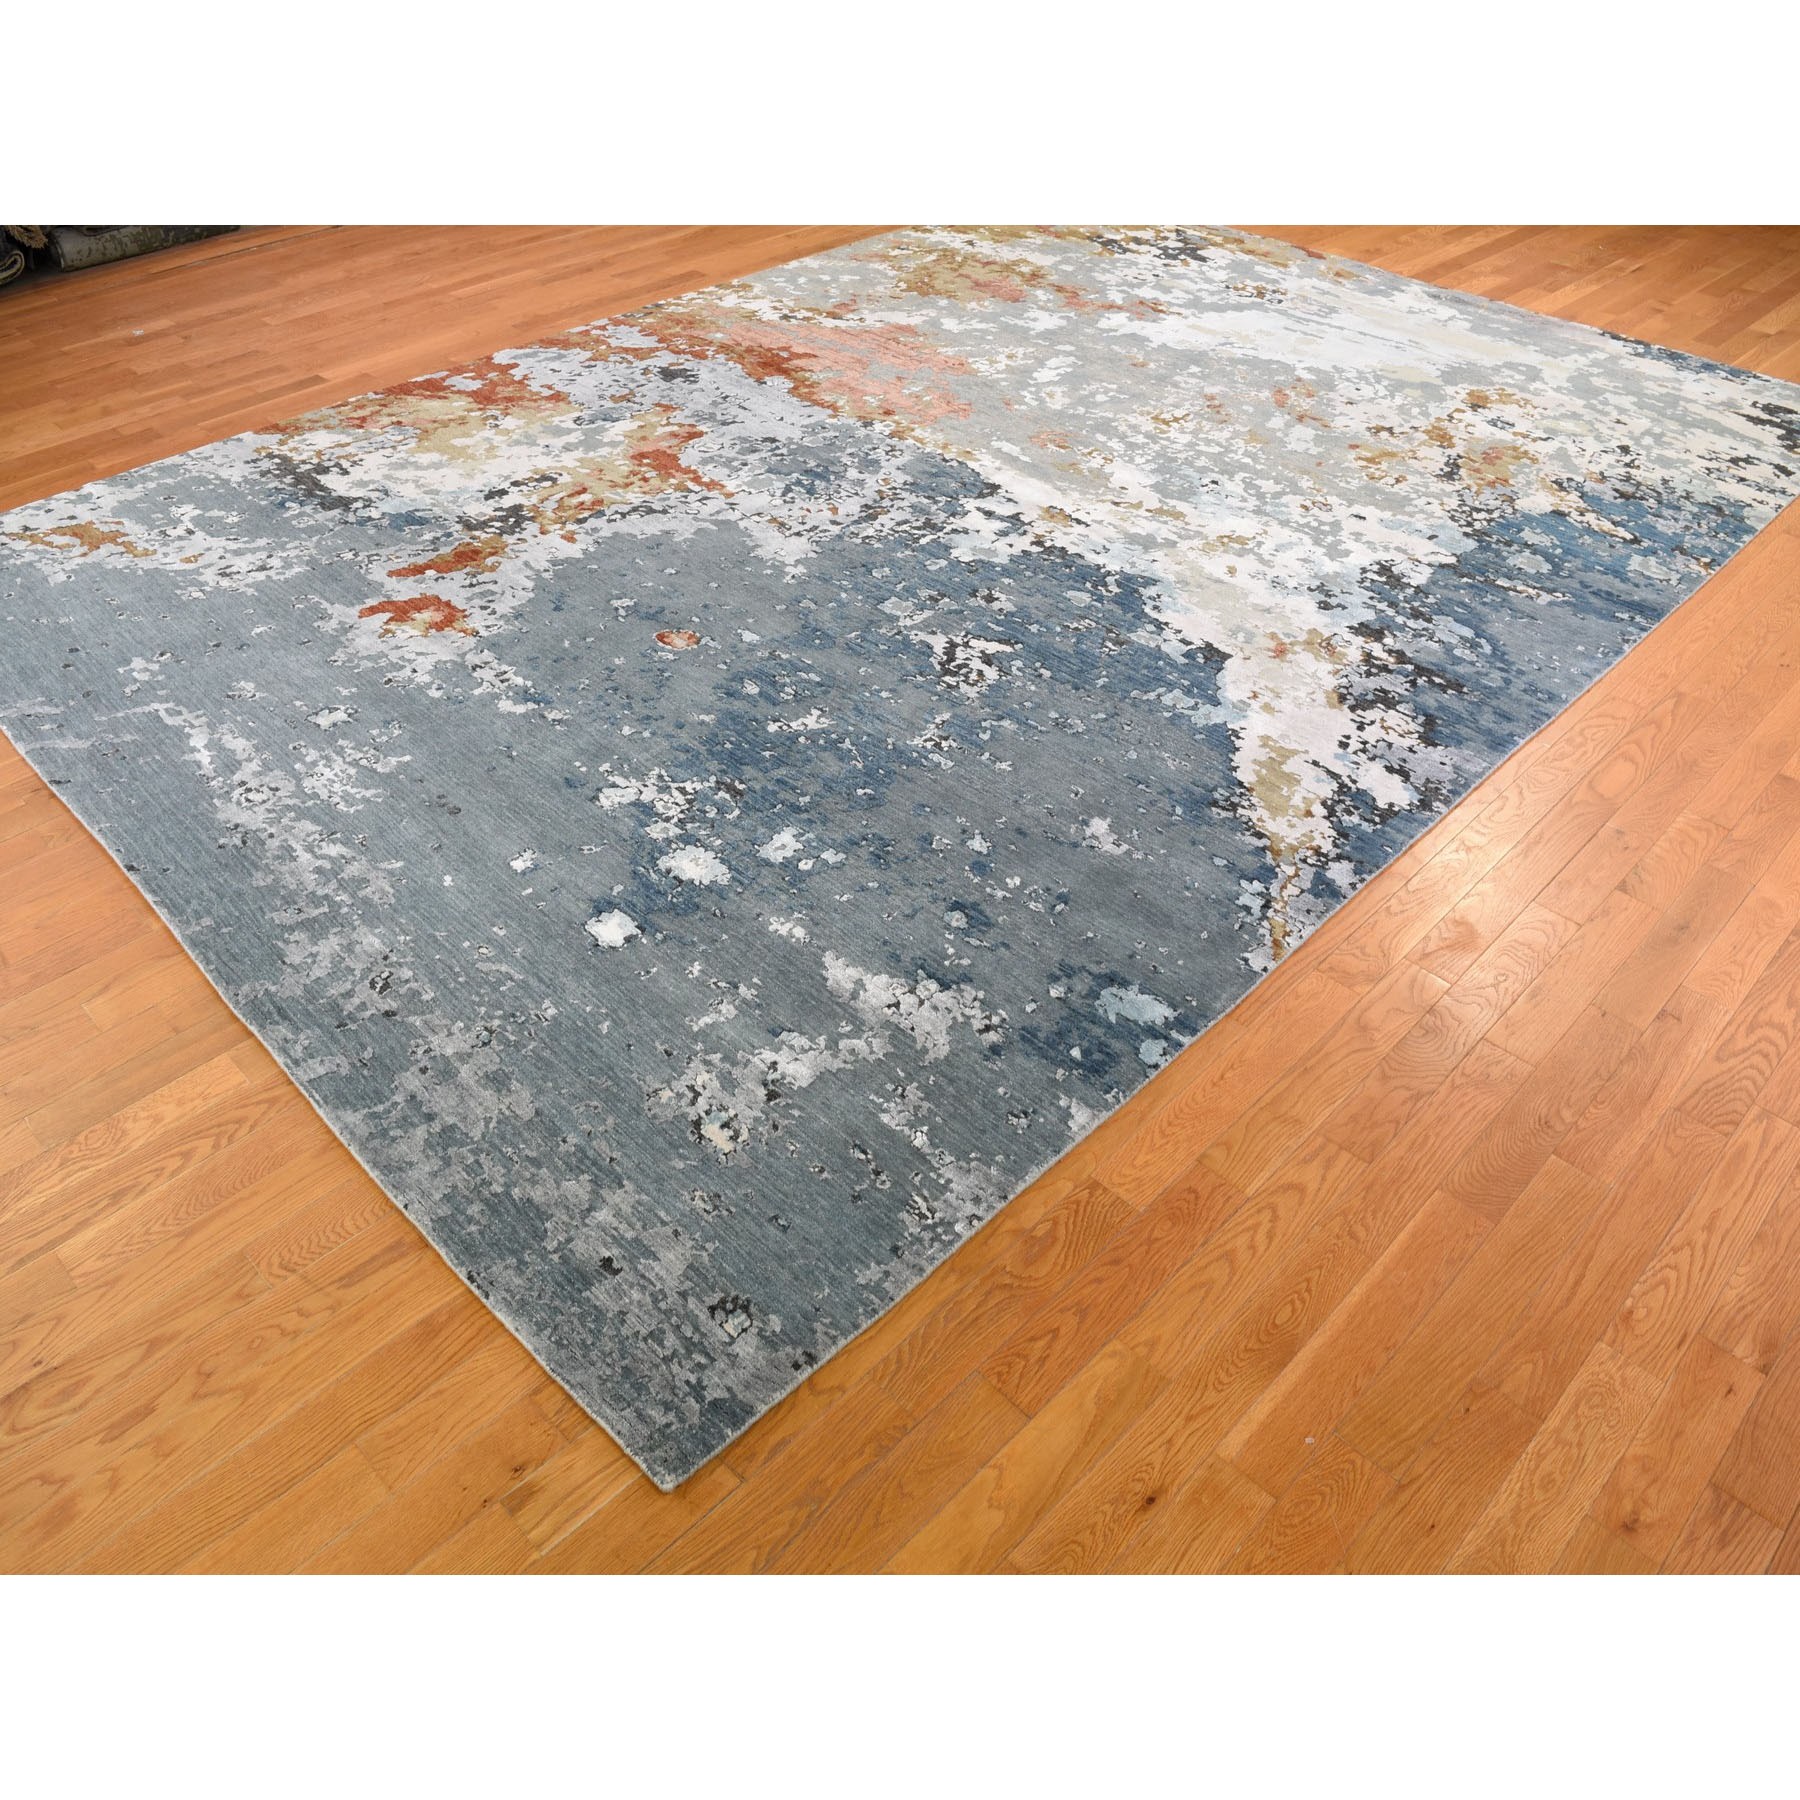 9-10 x14- Gray Abstract Design Wool and Silk Hi-Low Pile Hand Knotted Oriental Rug 